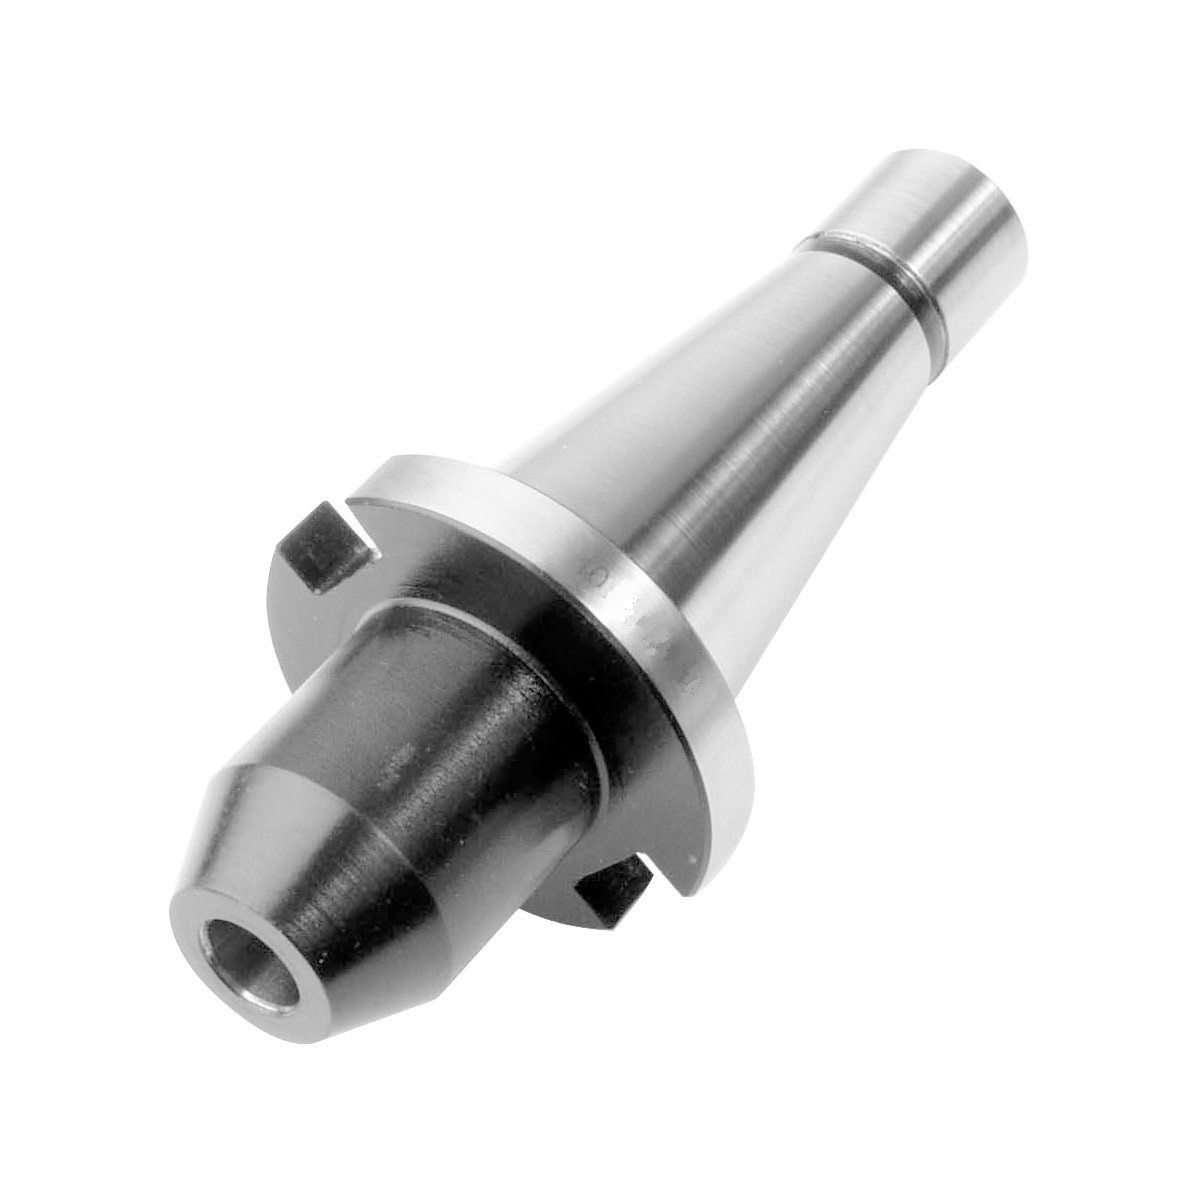 #40 NMTB X 3/4" END MILL HOLDER (3900-1705)